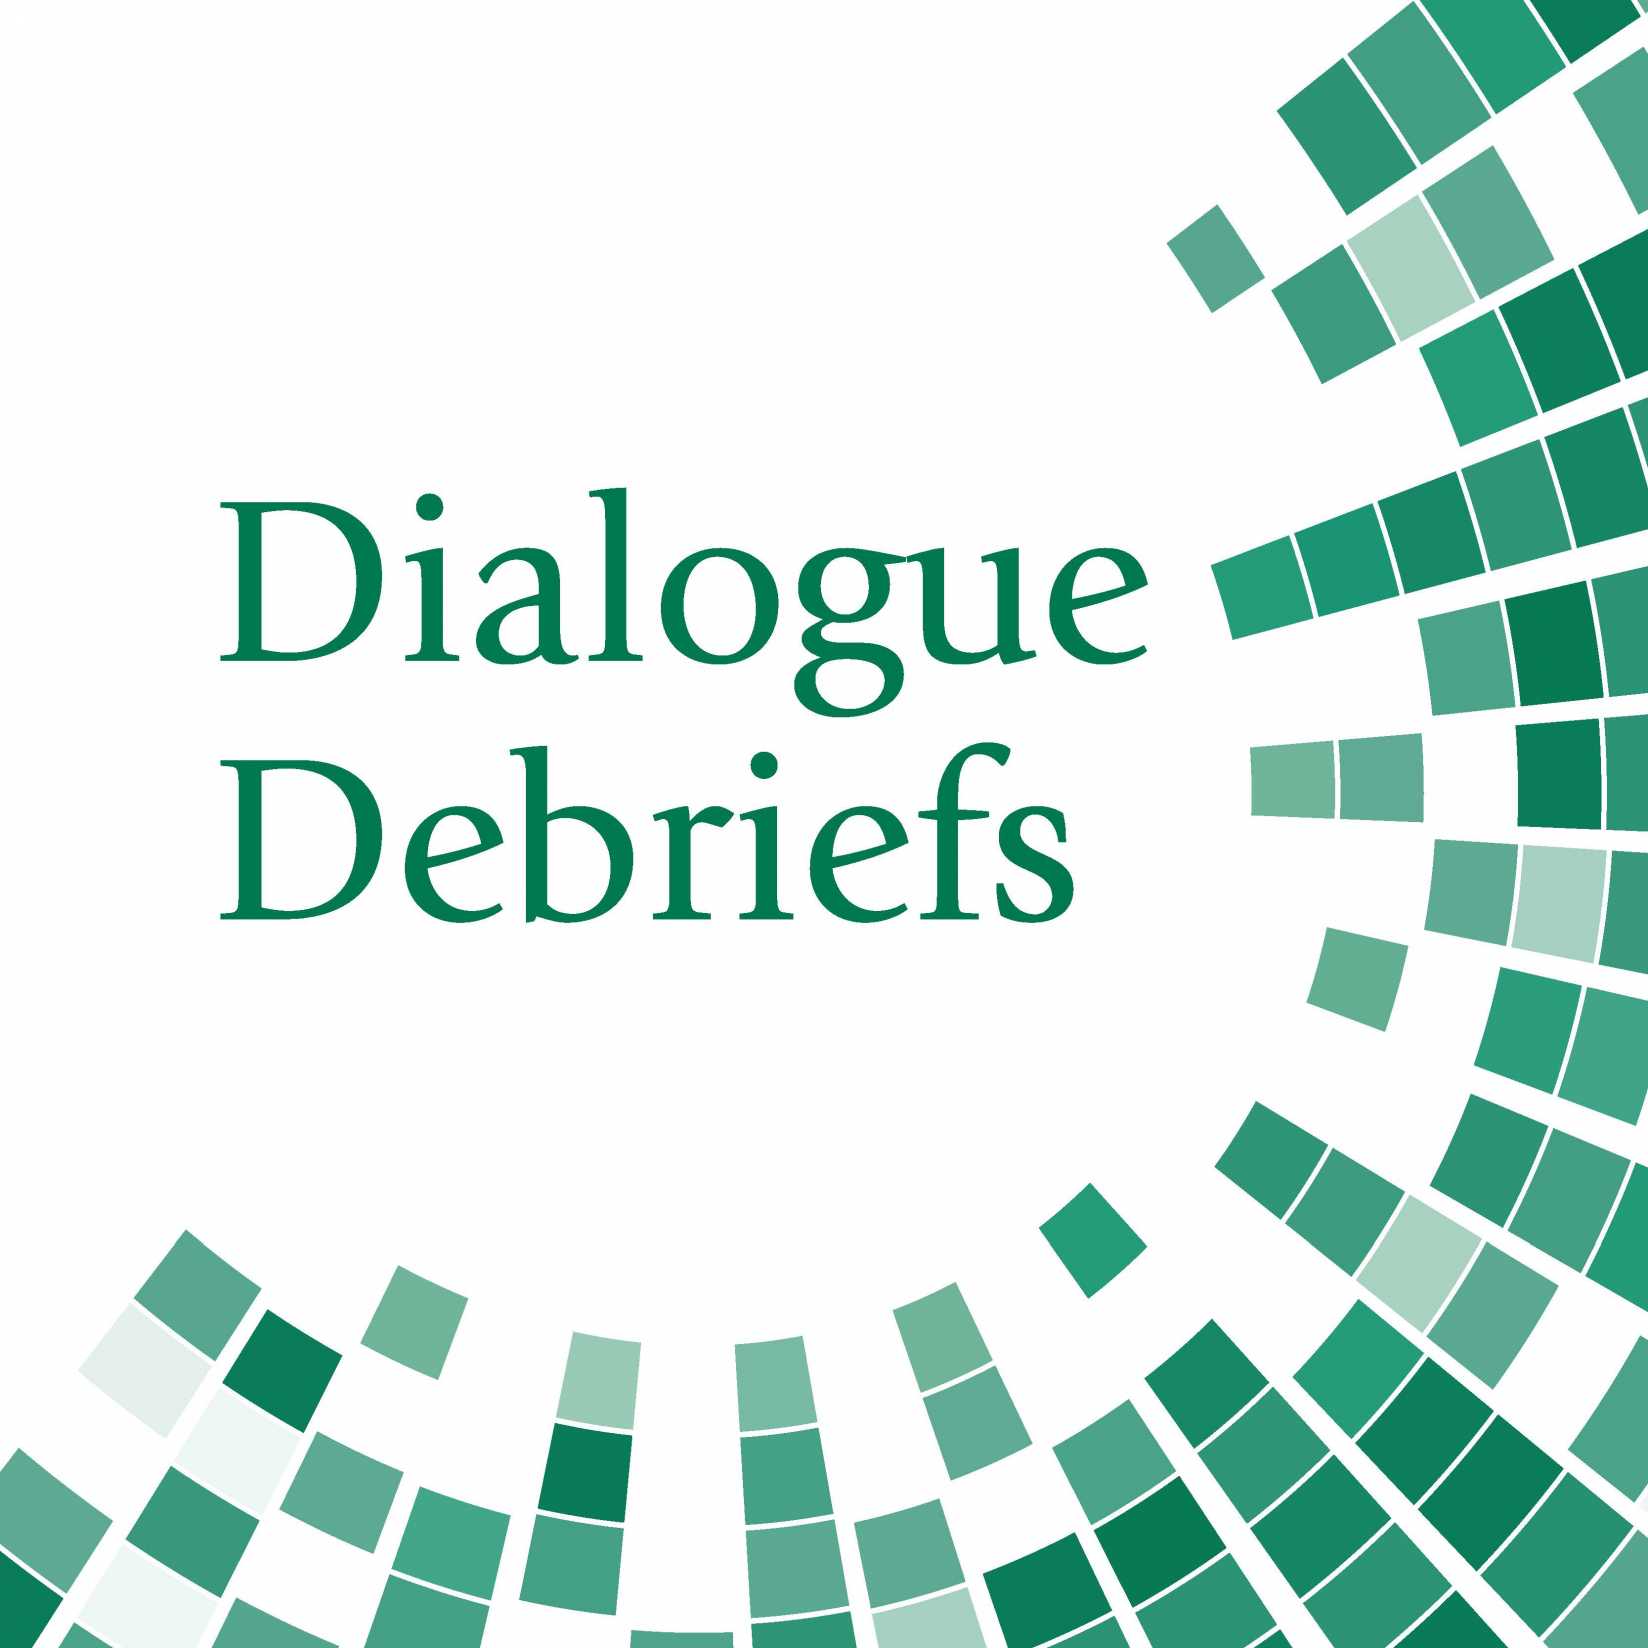 Meeting of the United Methodist Church– United States Conference of Catholic Bishops Dialogue